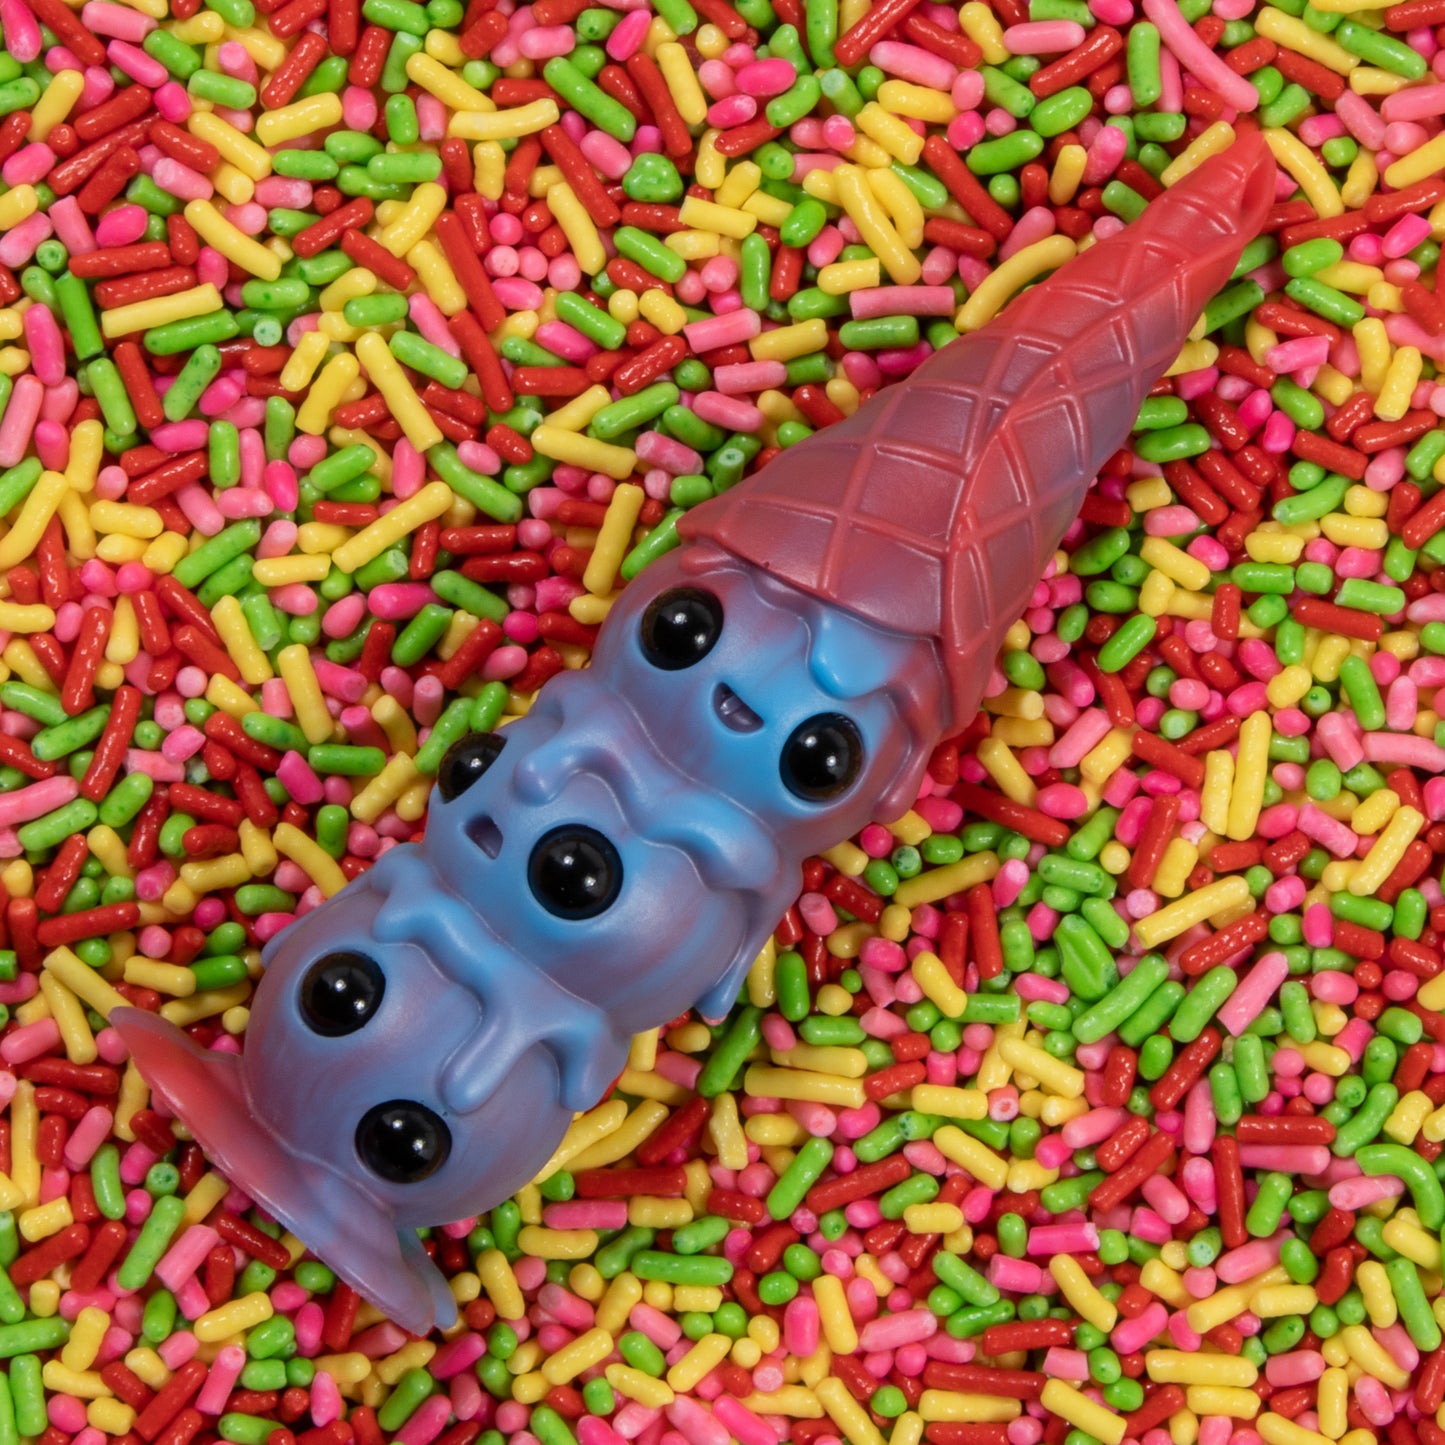 This is Wafull Berry Bite Limited Edition Resin Figure